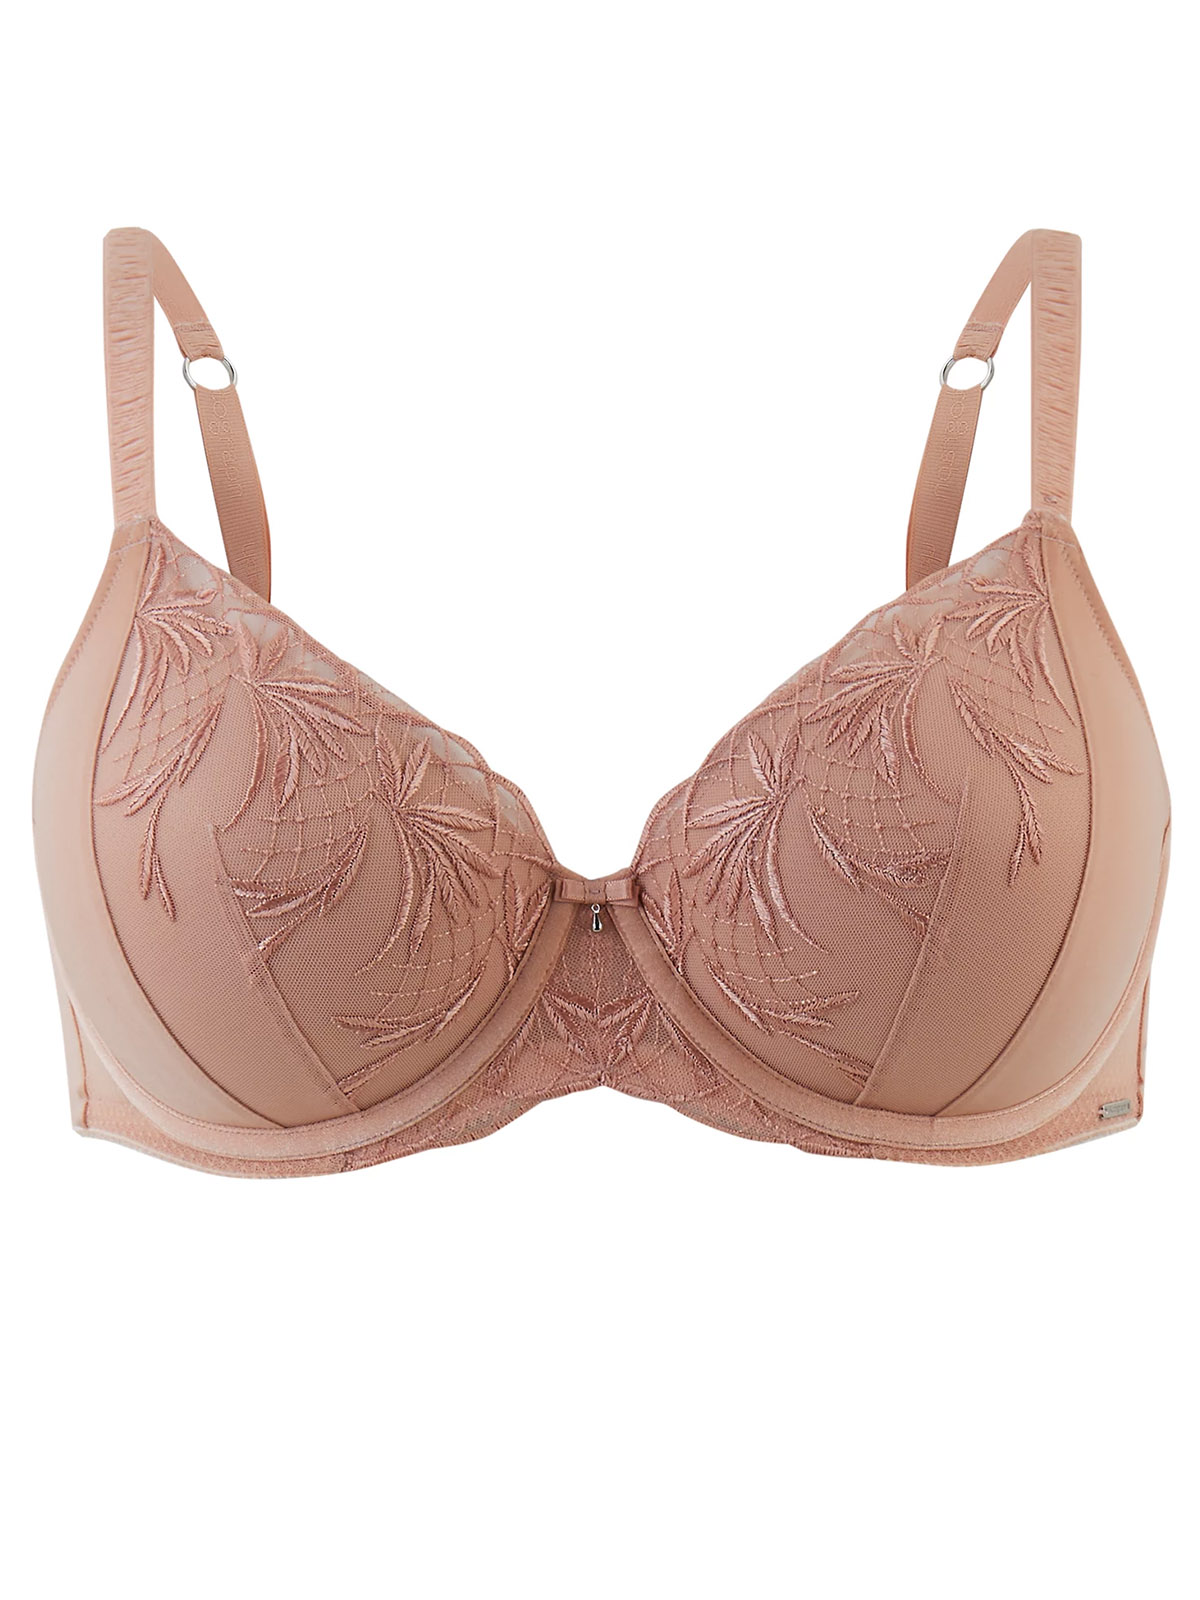  - - 4UTOGRAPH NUDE Athena Embroidered Padded Full Cup Bra